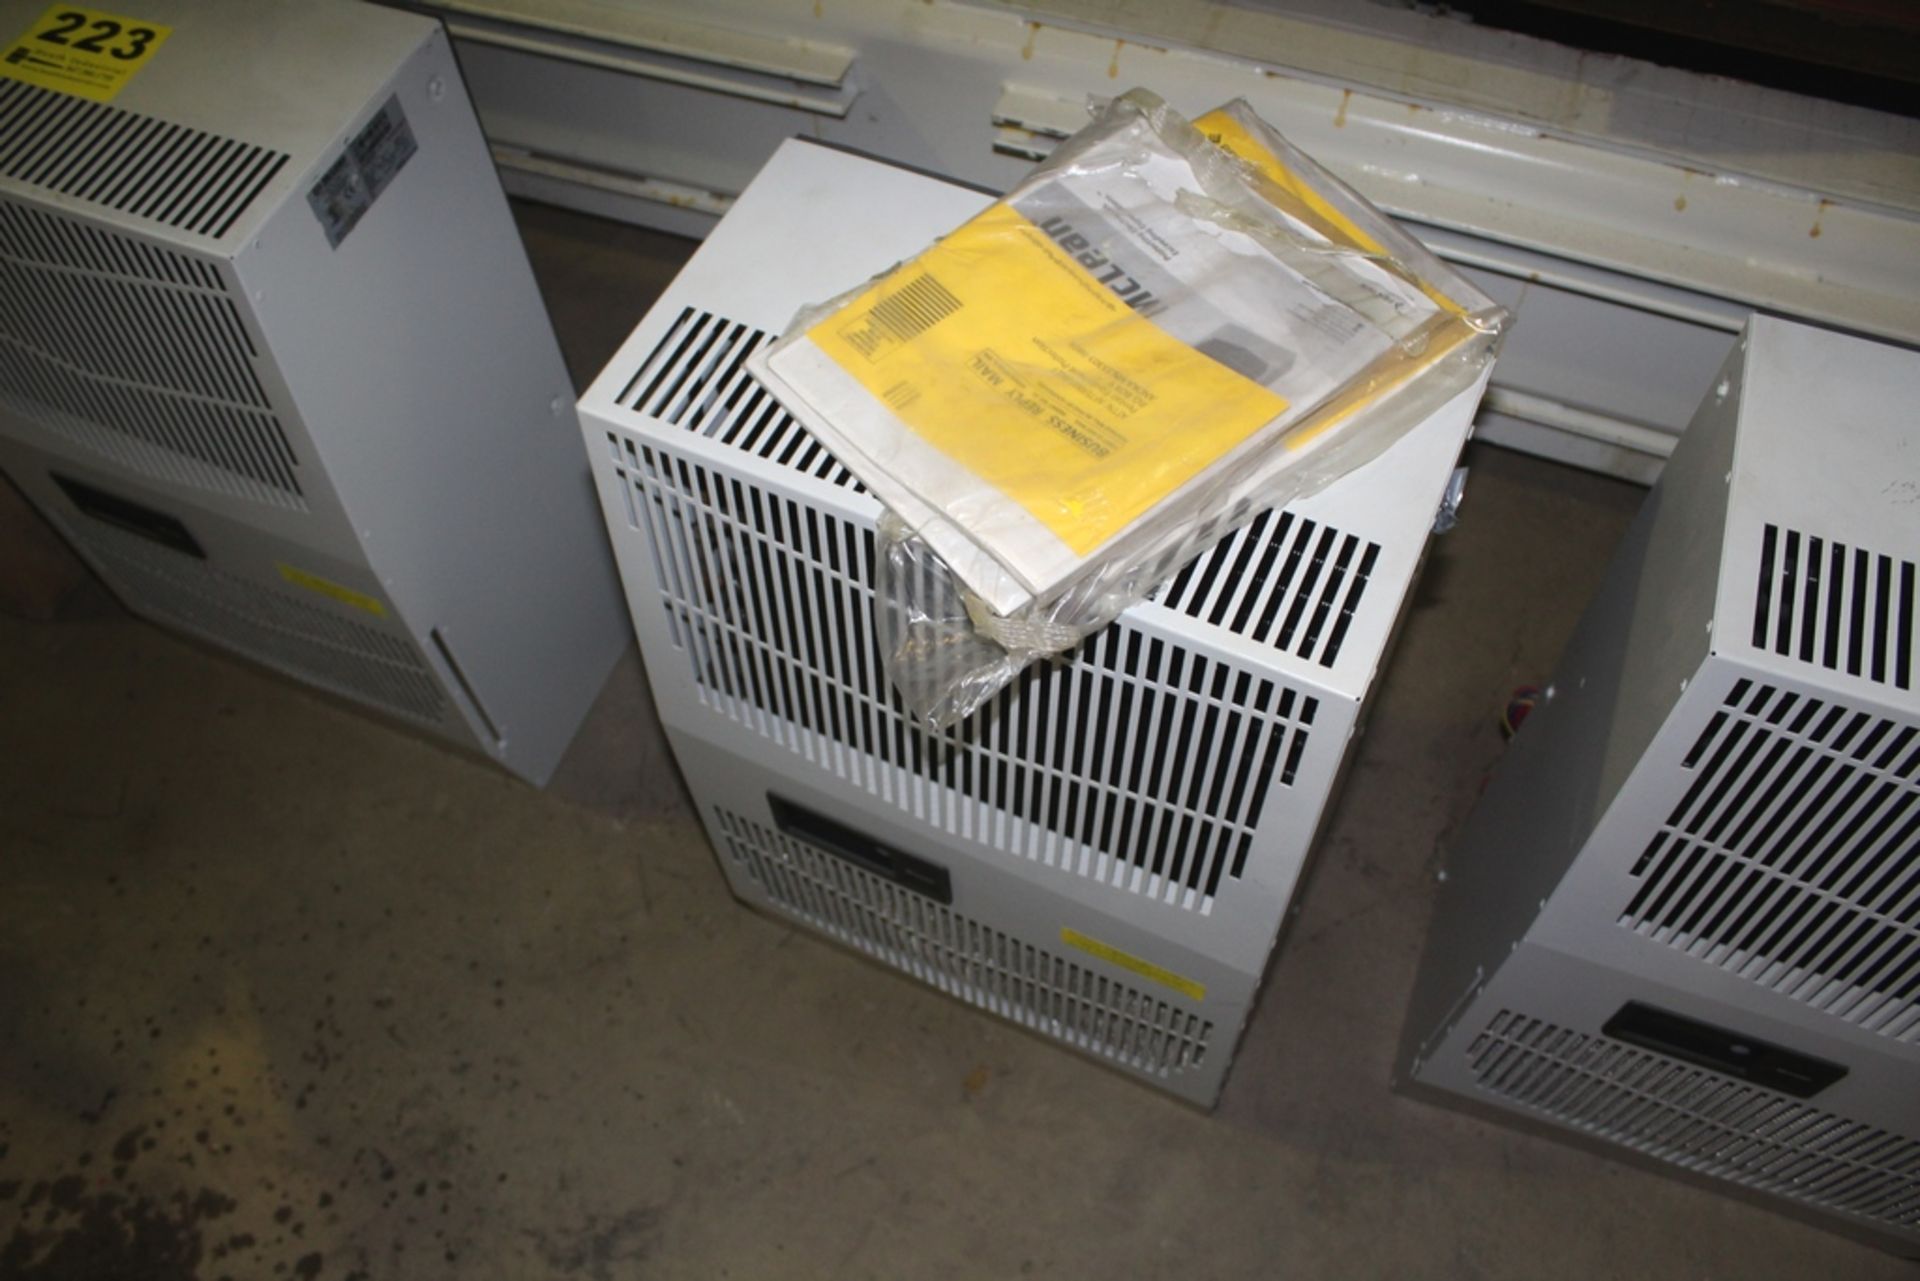 HOFFMAN SPECTRACOOL MODEL G280446G050 AIR CONDITIONING UNIT, 460V 3 PHASE 4,900 BTU / HOUR